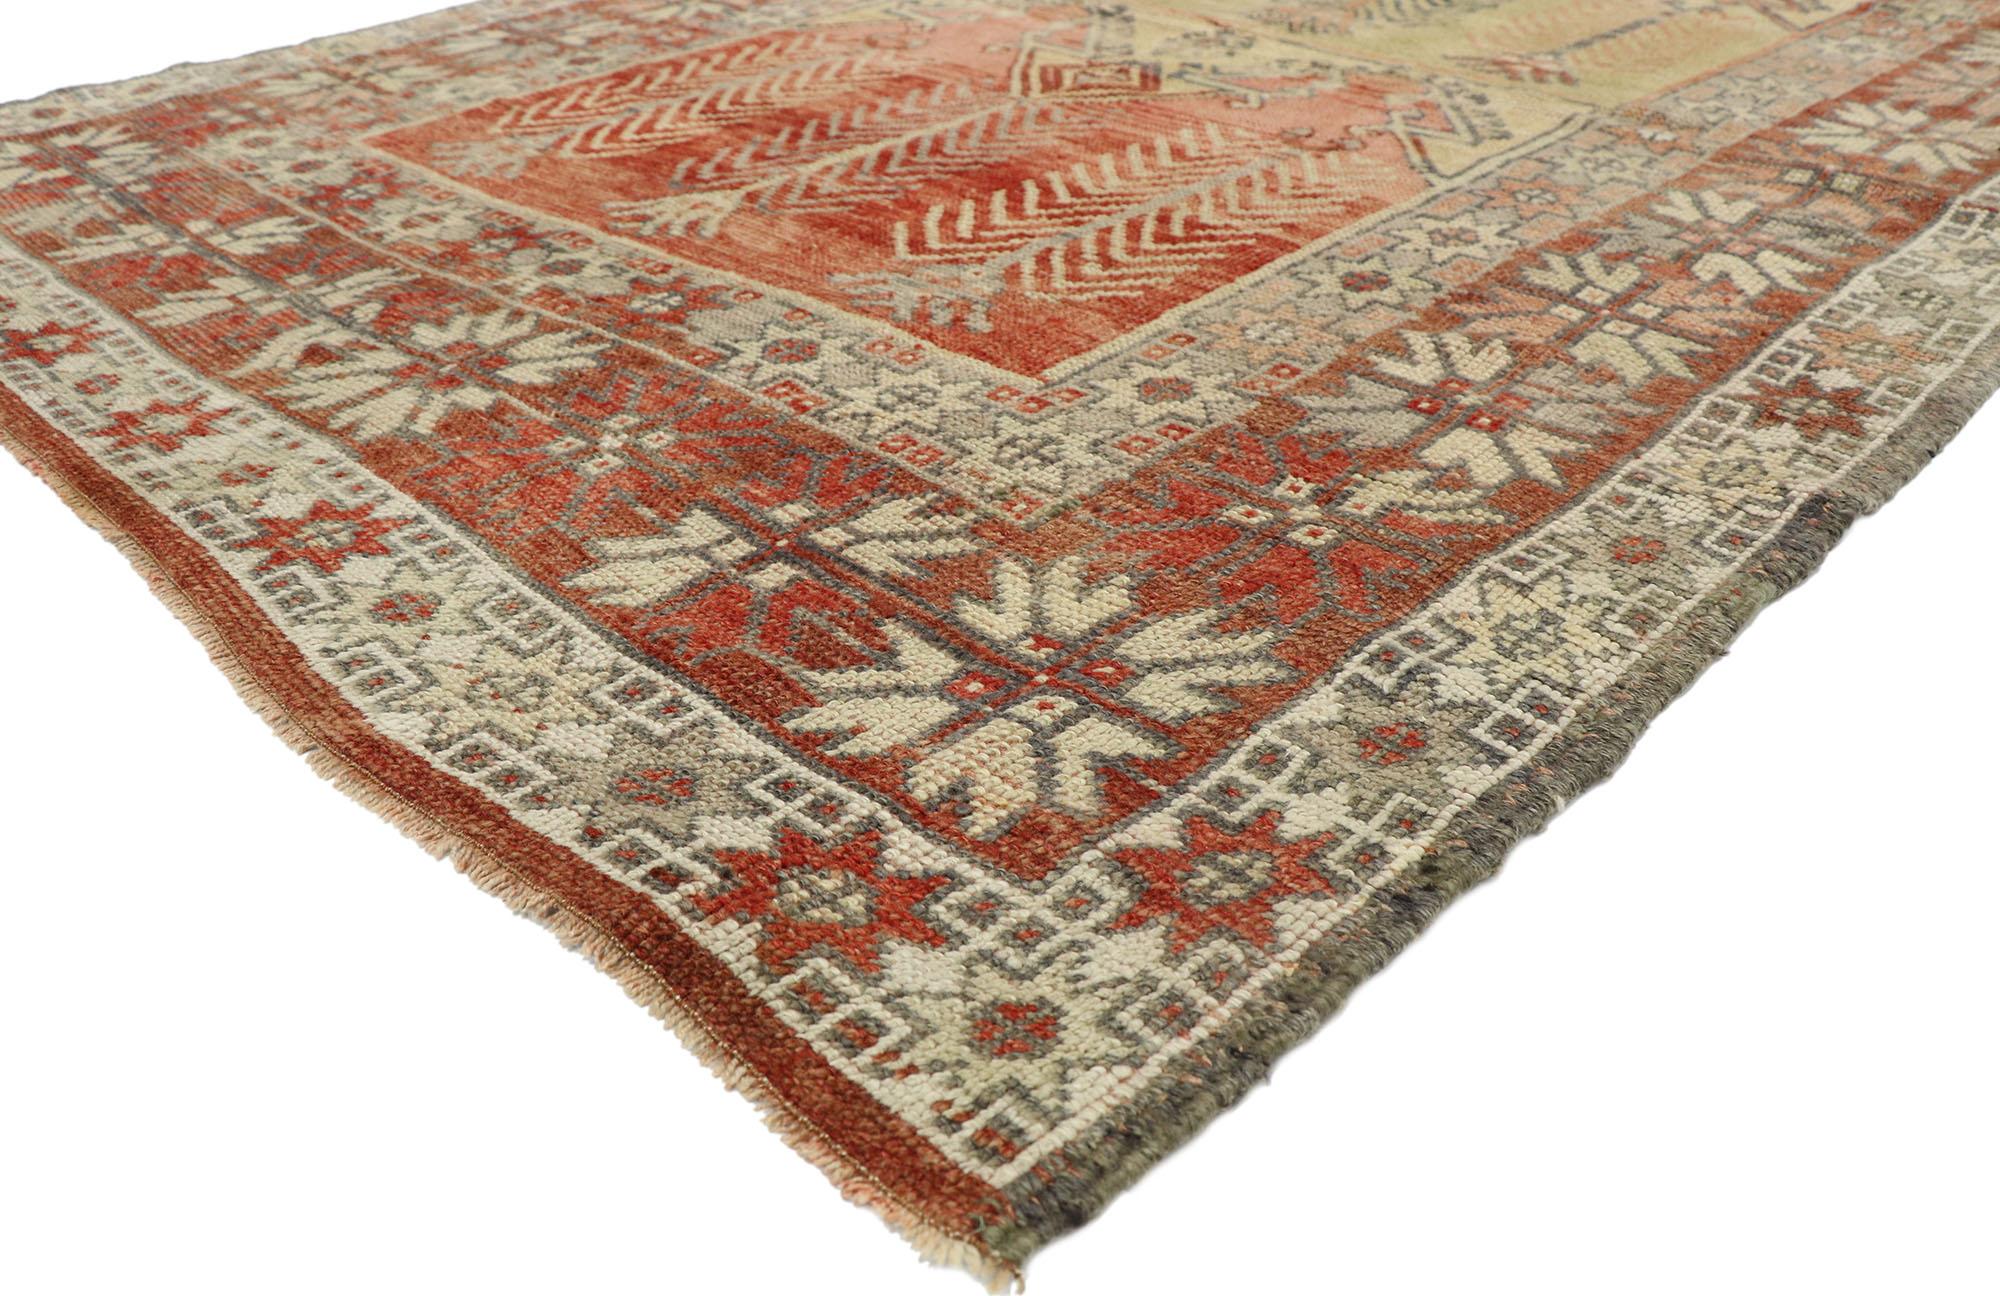 52755, vintage Turkish Oushak rug, Anatolian Prayer rug with modern rustic cabin style. Immersed in Anatolian history and refined colors, this hand knotted wool vintage Turkish prayer rug combines simplicity with sophistication. The vintage Turkish